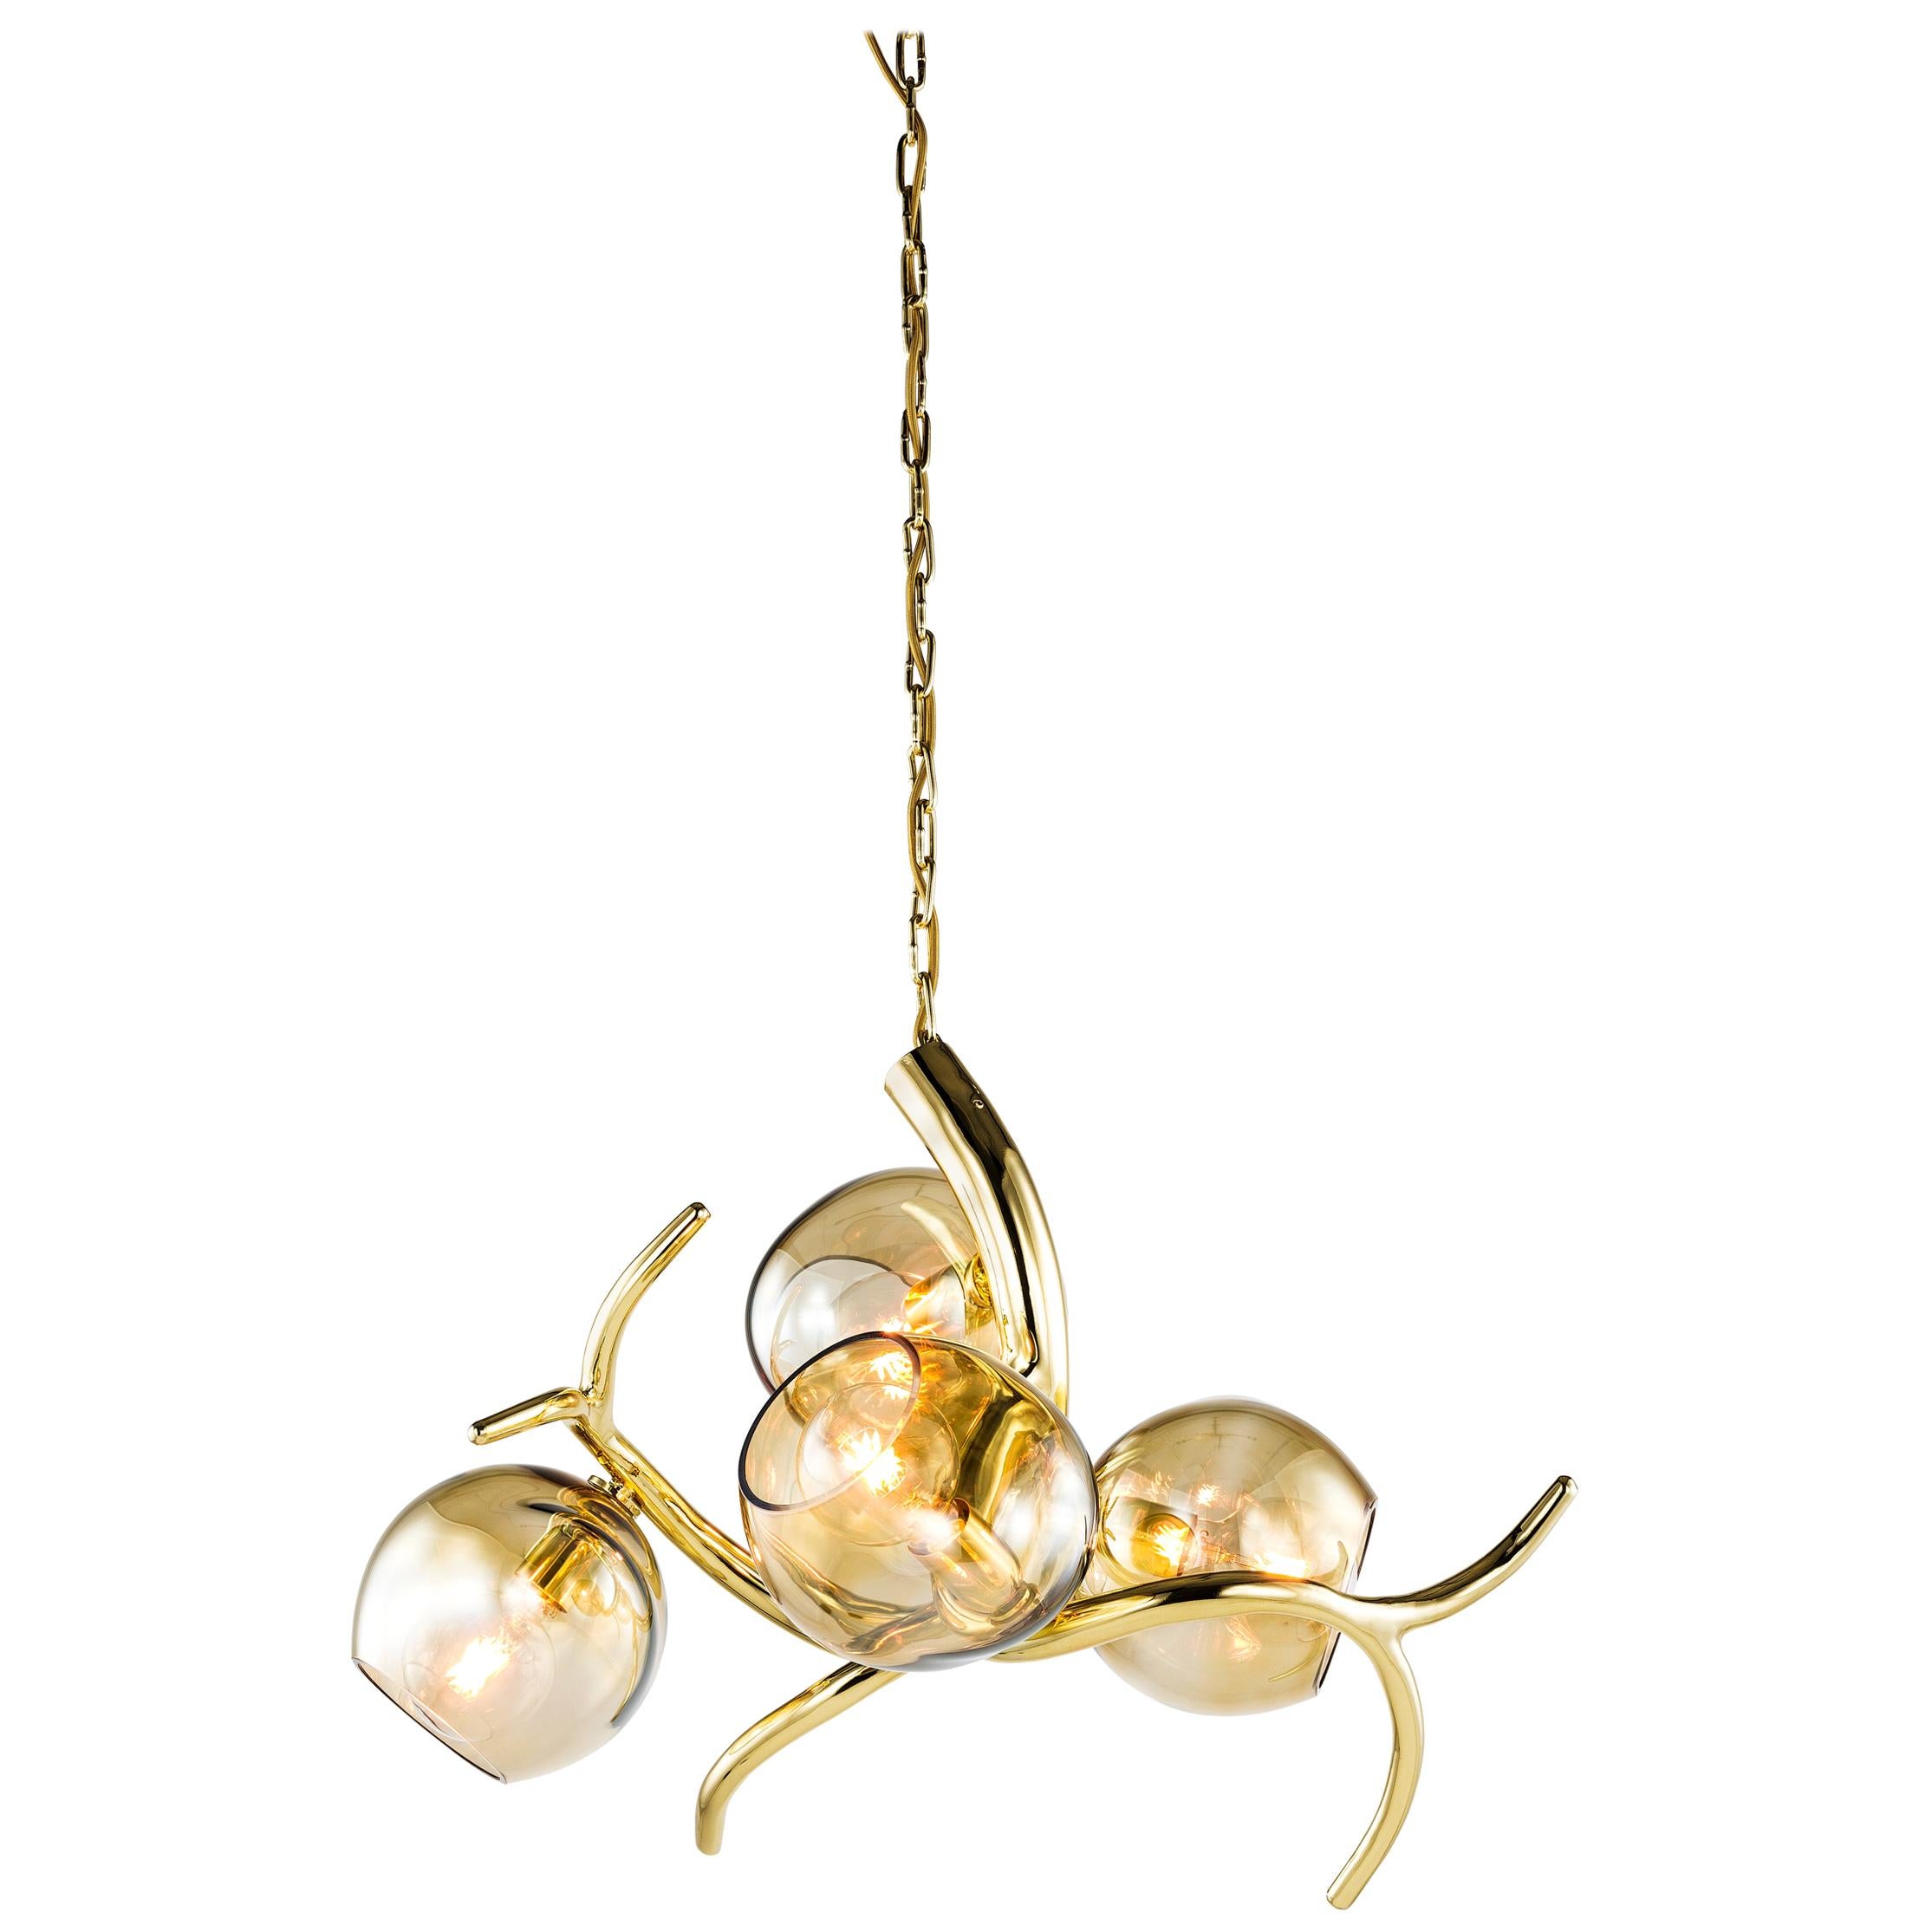 Modern Pendant with Colored Glass in a Brass Finish, Ersa Collection, by Brand For Sale